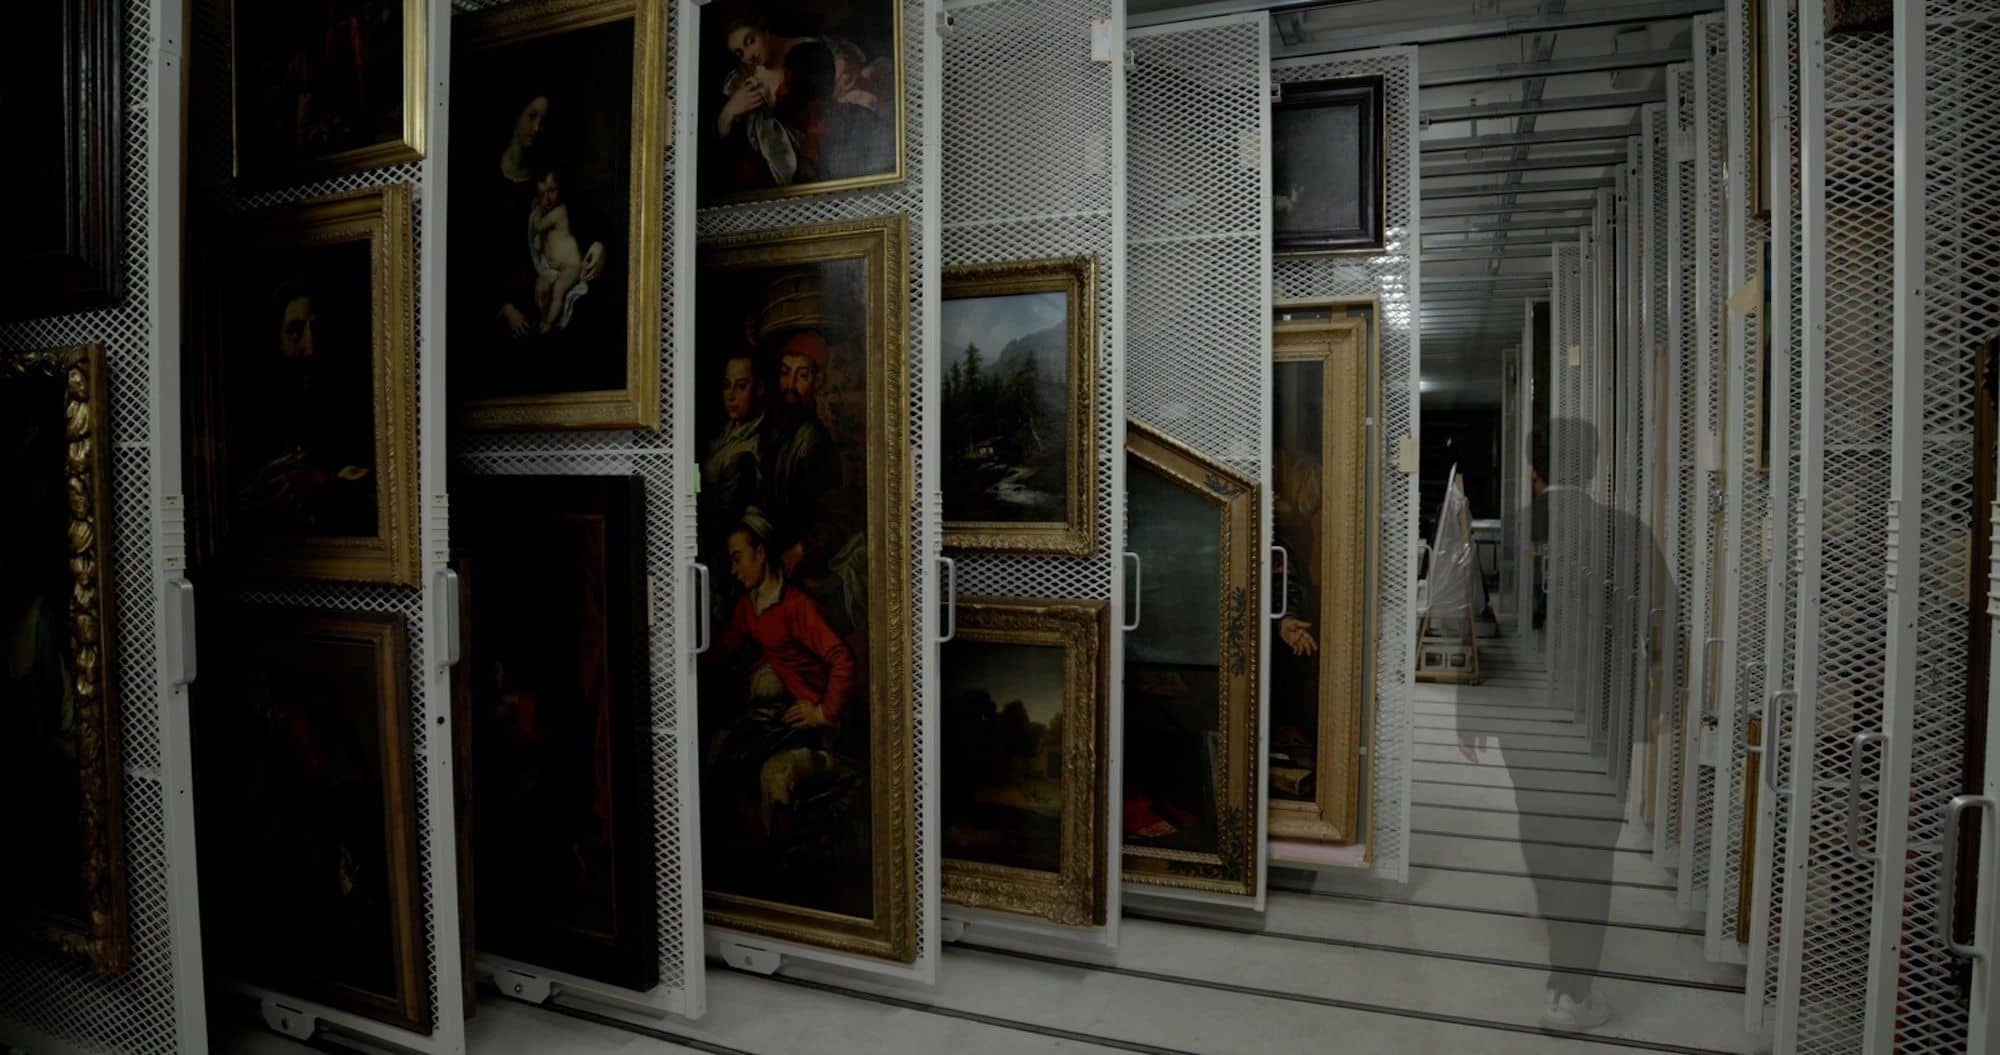 An experimental ‘art heist’ film leaves paintings in the vault and strands unresolved